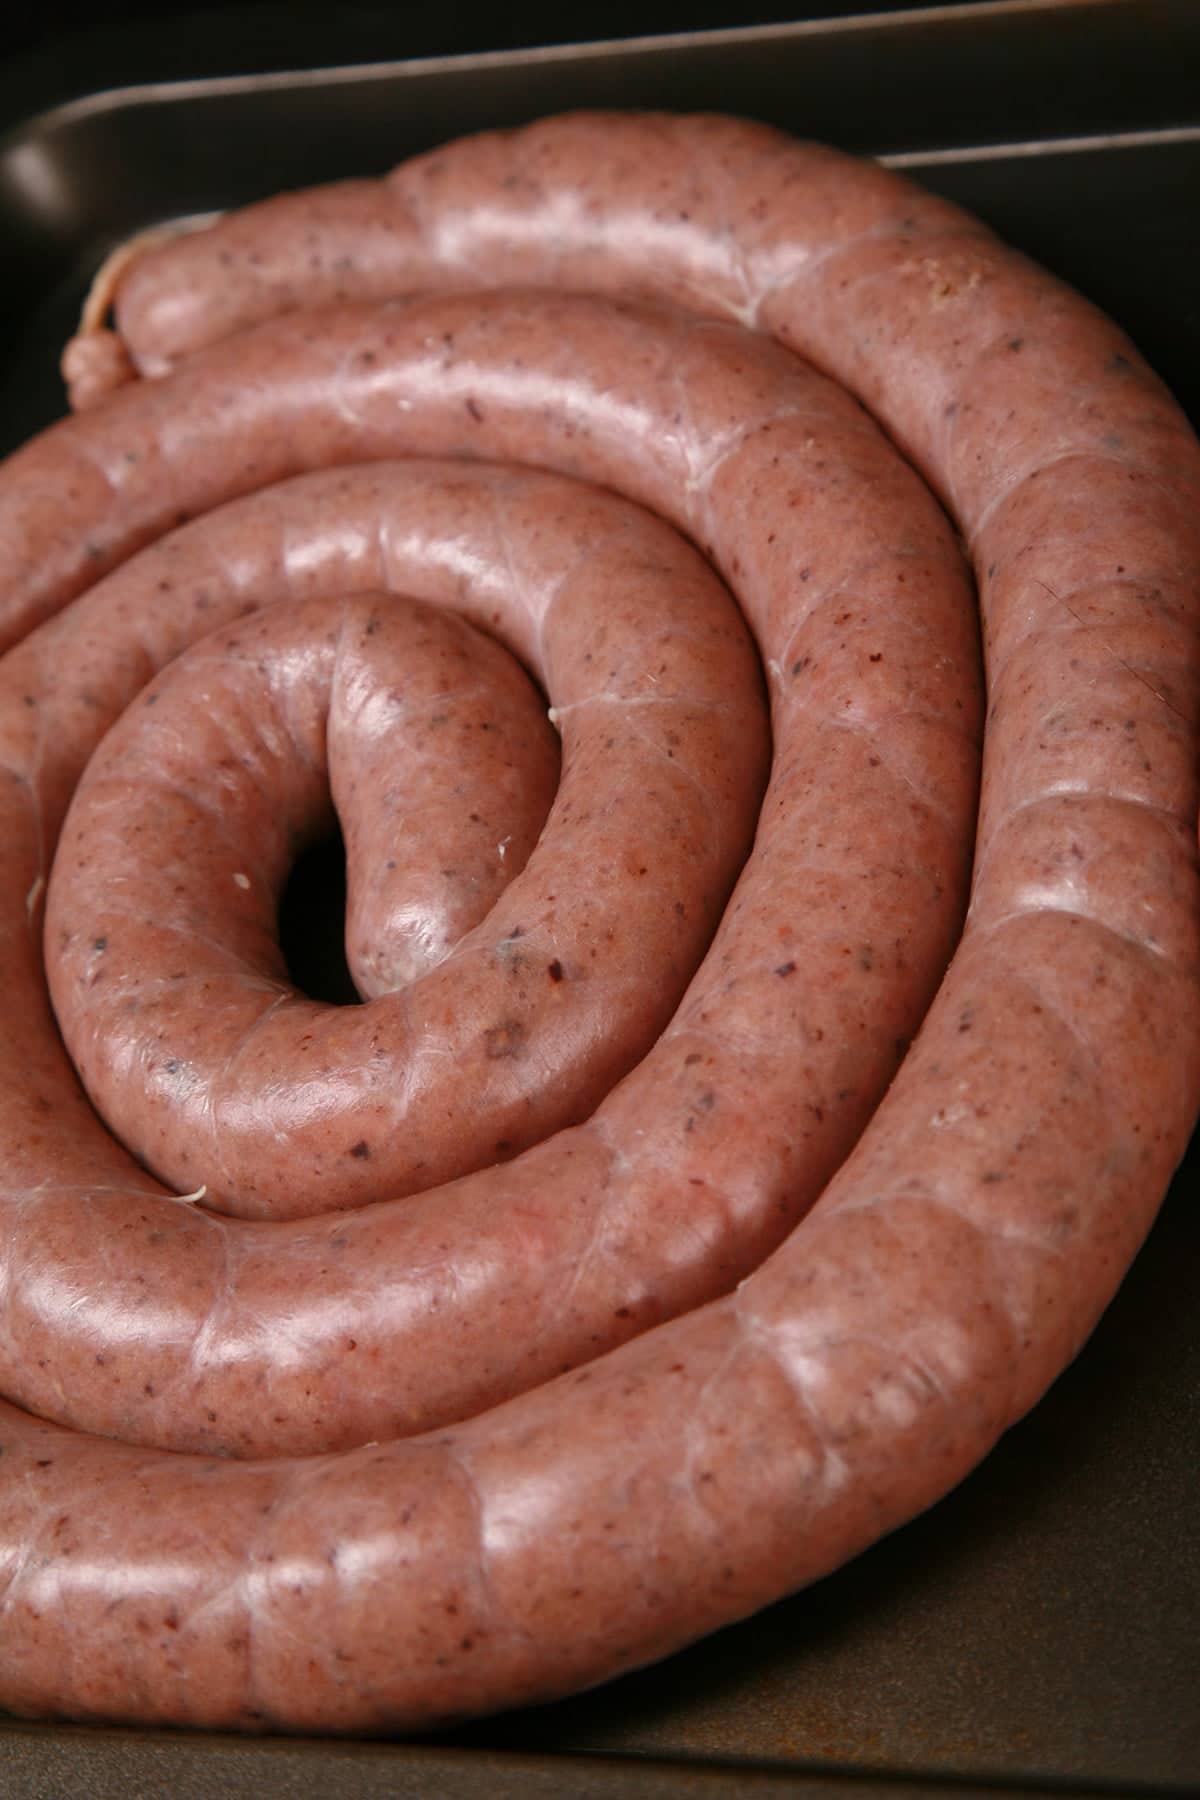 A large coil of Swedish potato sausage on a white plate. It's garnished with slices of beet pickles and some parsley.